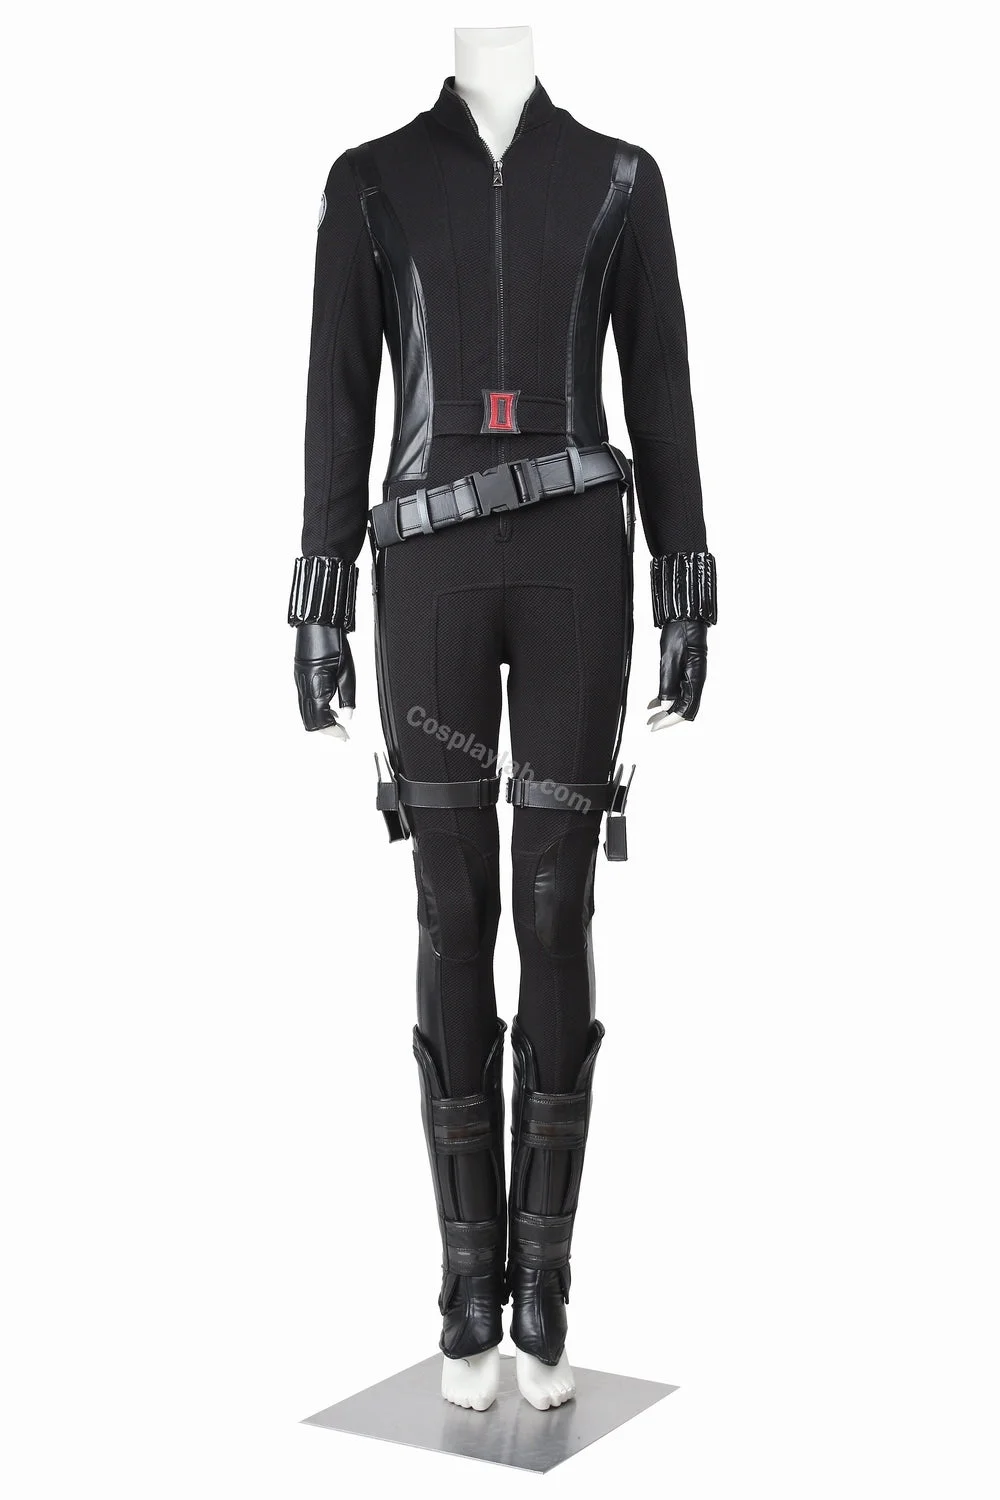 Black Widow Agents of SHIELD halloween adults Cosplay Suit Classic Black Costumes kostume outfit By CosplayLab